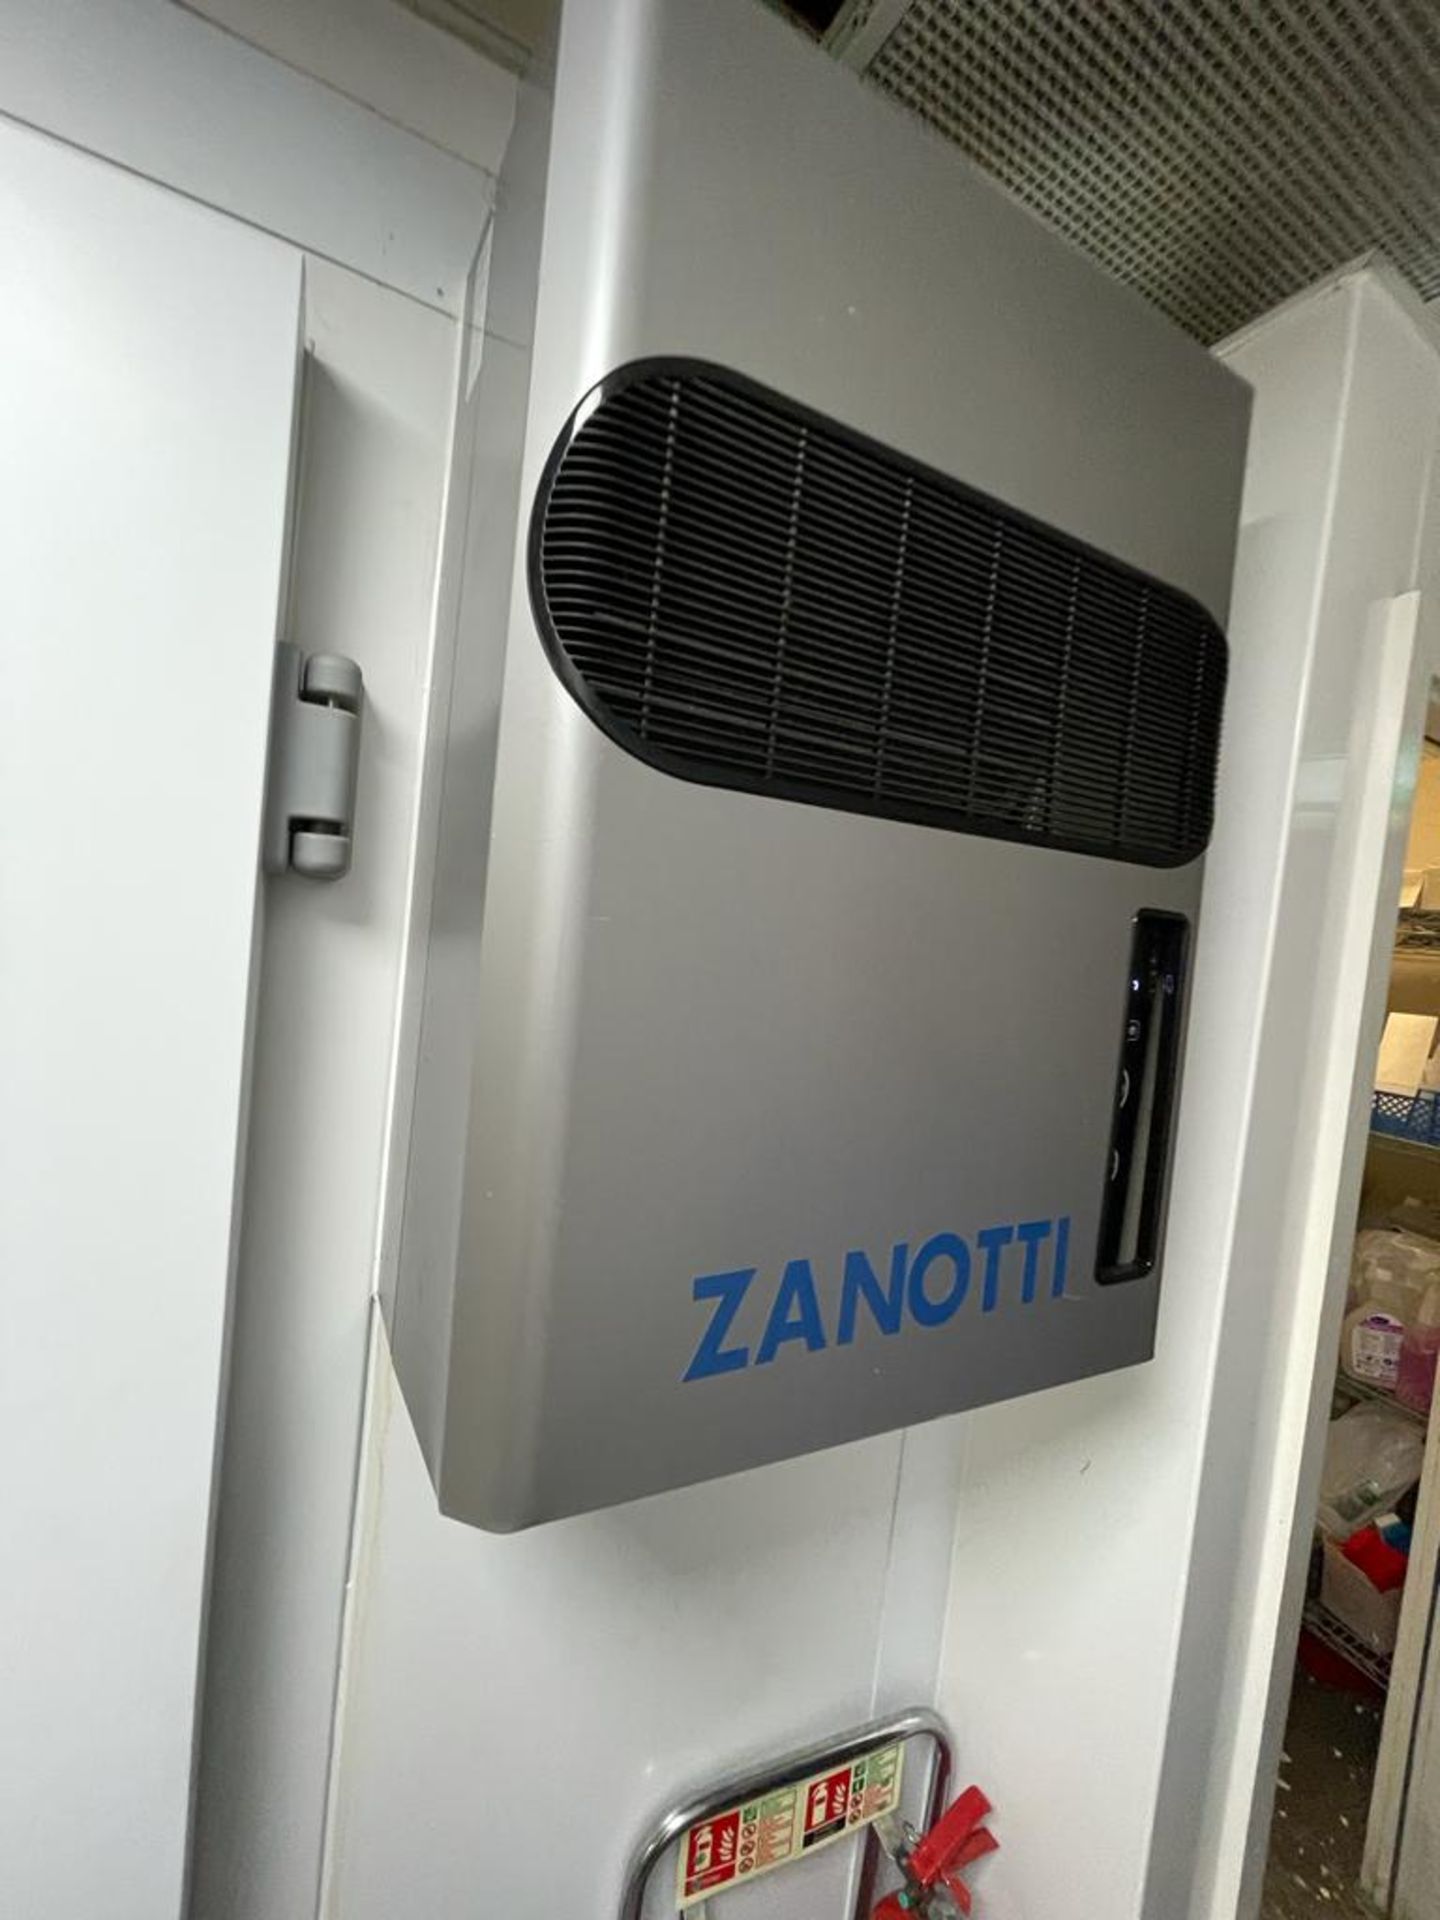 1 x Walk In Refrigerated Cold and Freezer With Zanotti Control Units - Ref: BK249 - CL686 - - Image 20 of 24